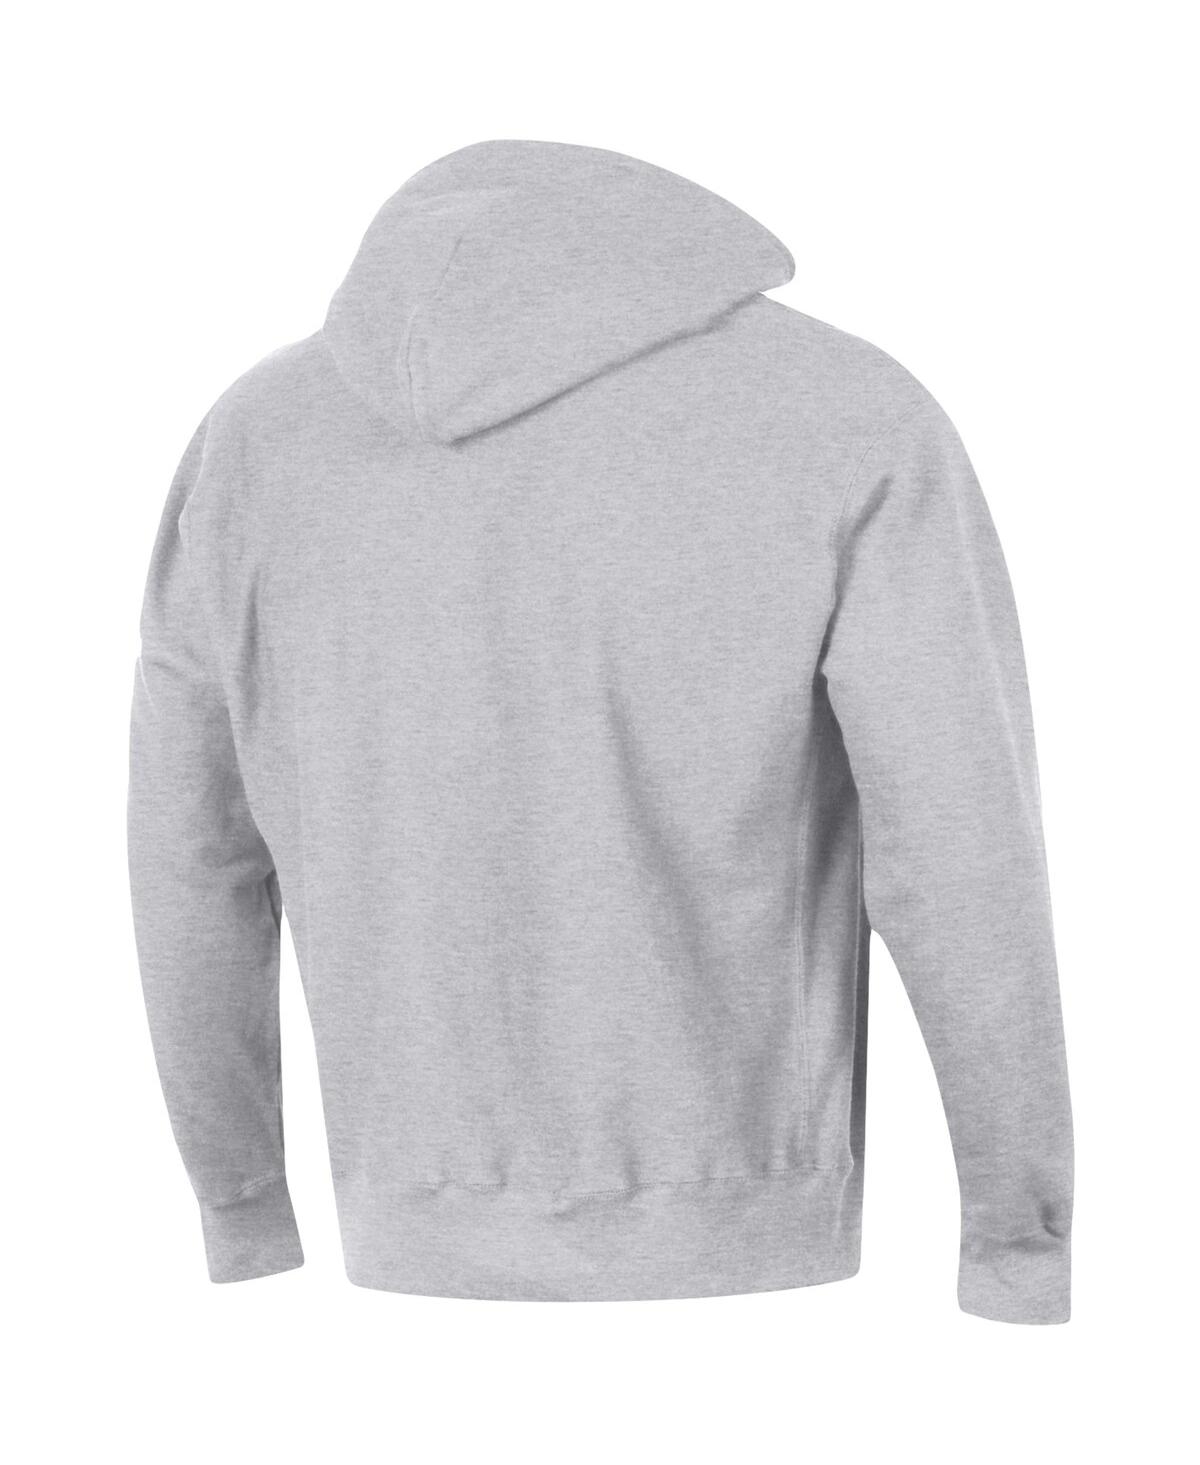 Shop Champion Men's  Heathered Gray West Virginia Mountaineers Team Arch Reverse Weave Pullover Hoodie